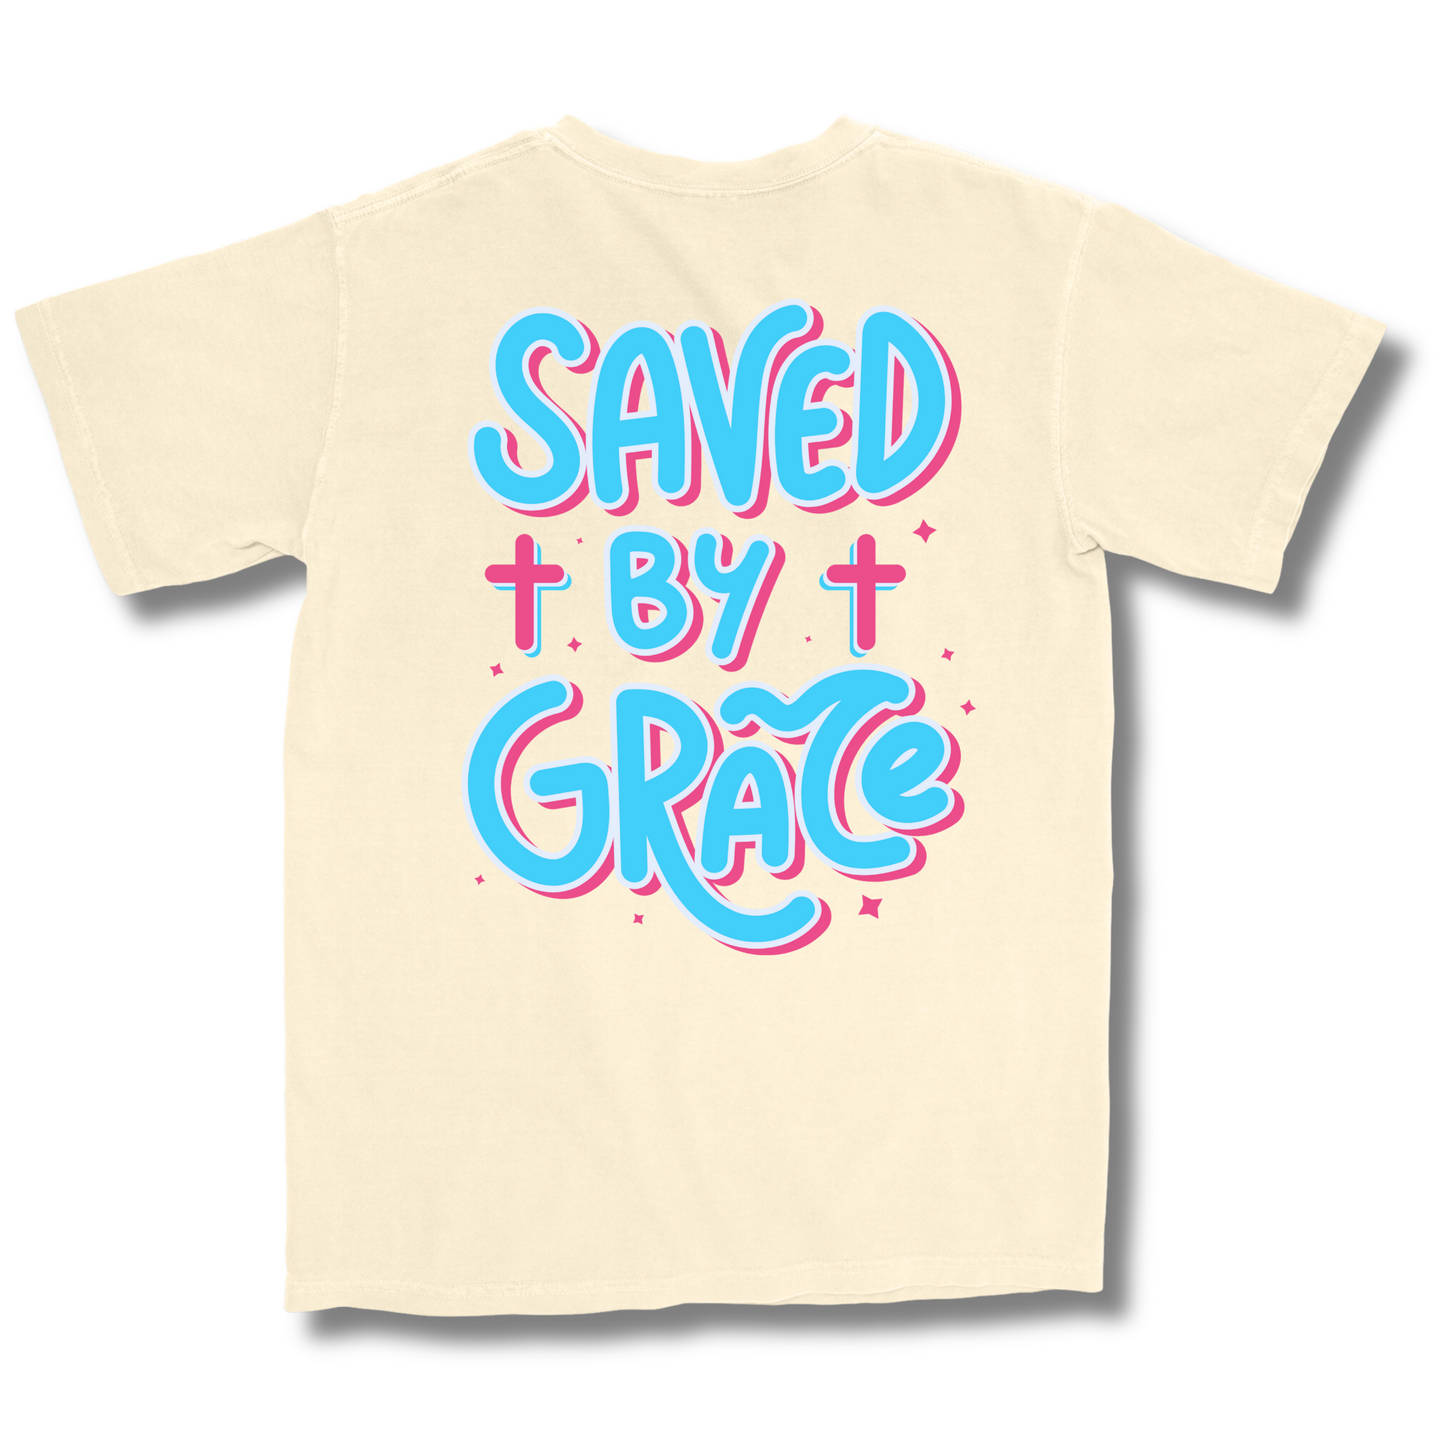 Saved by Grace - Sweet Cream T-shirt